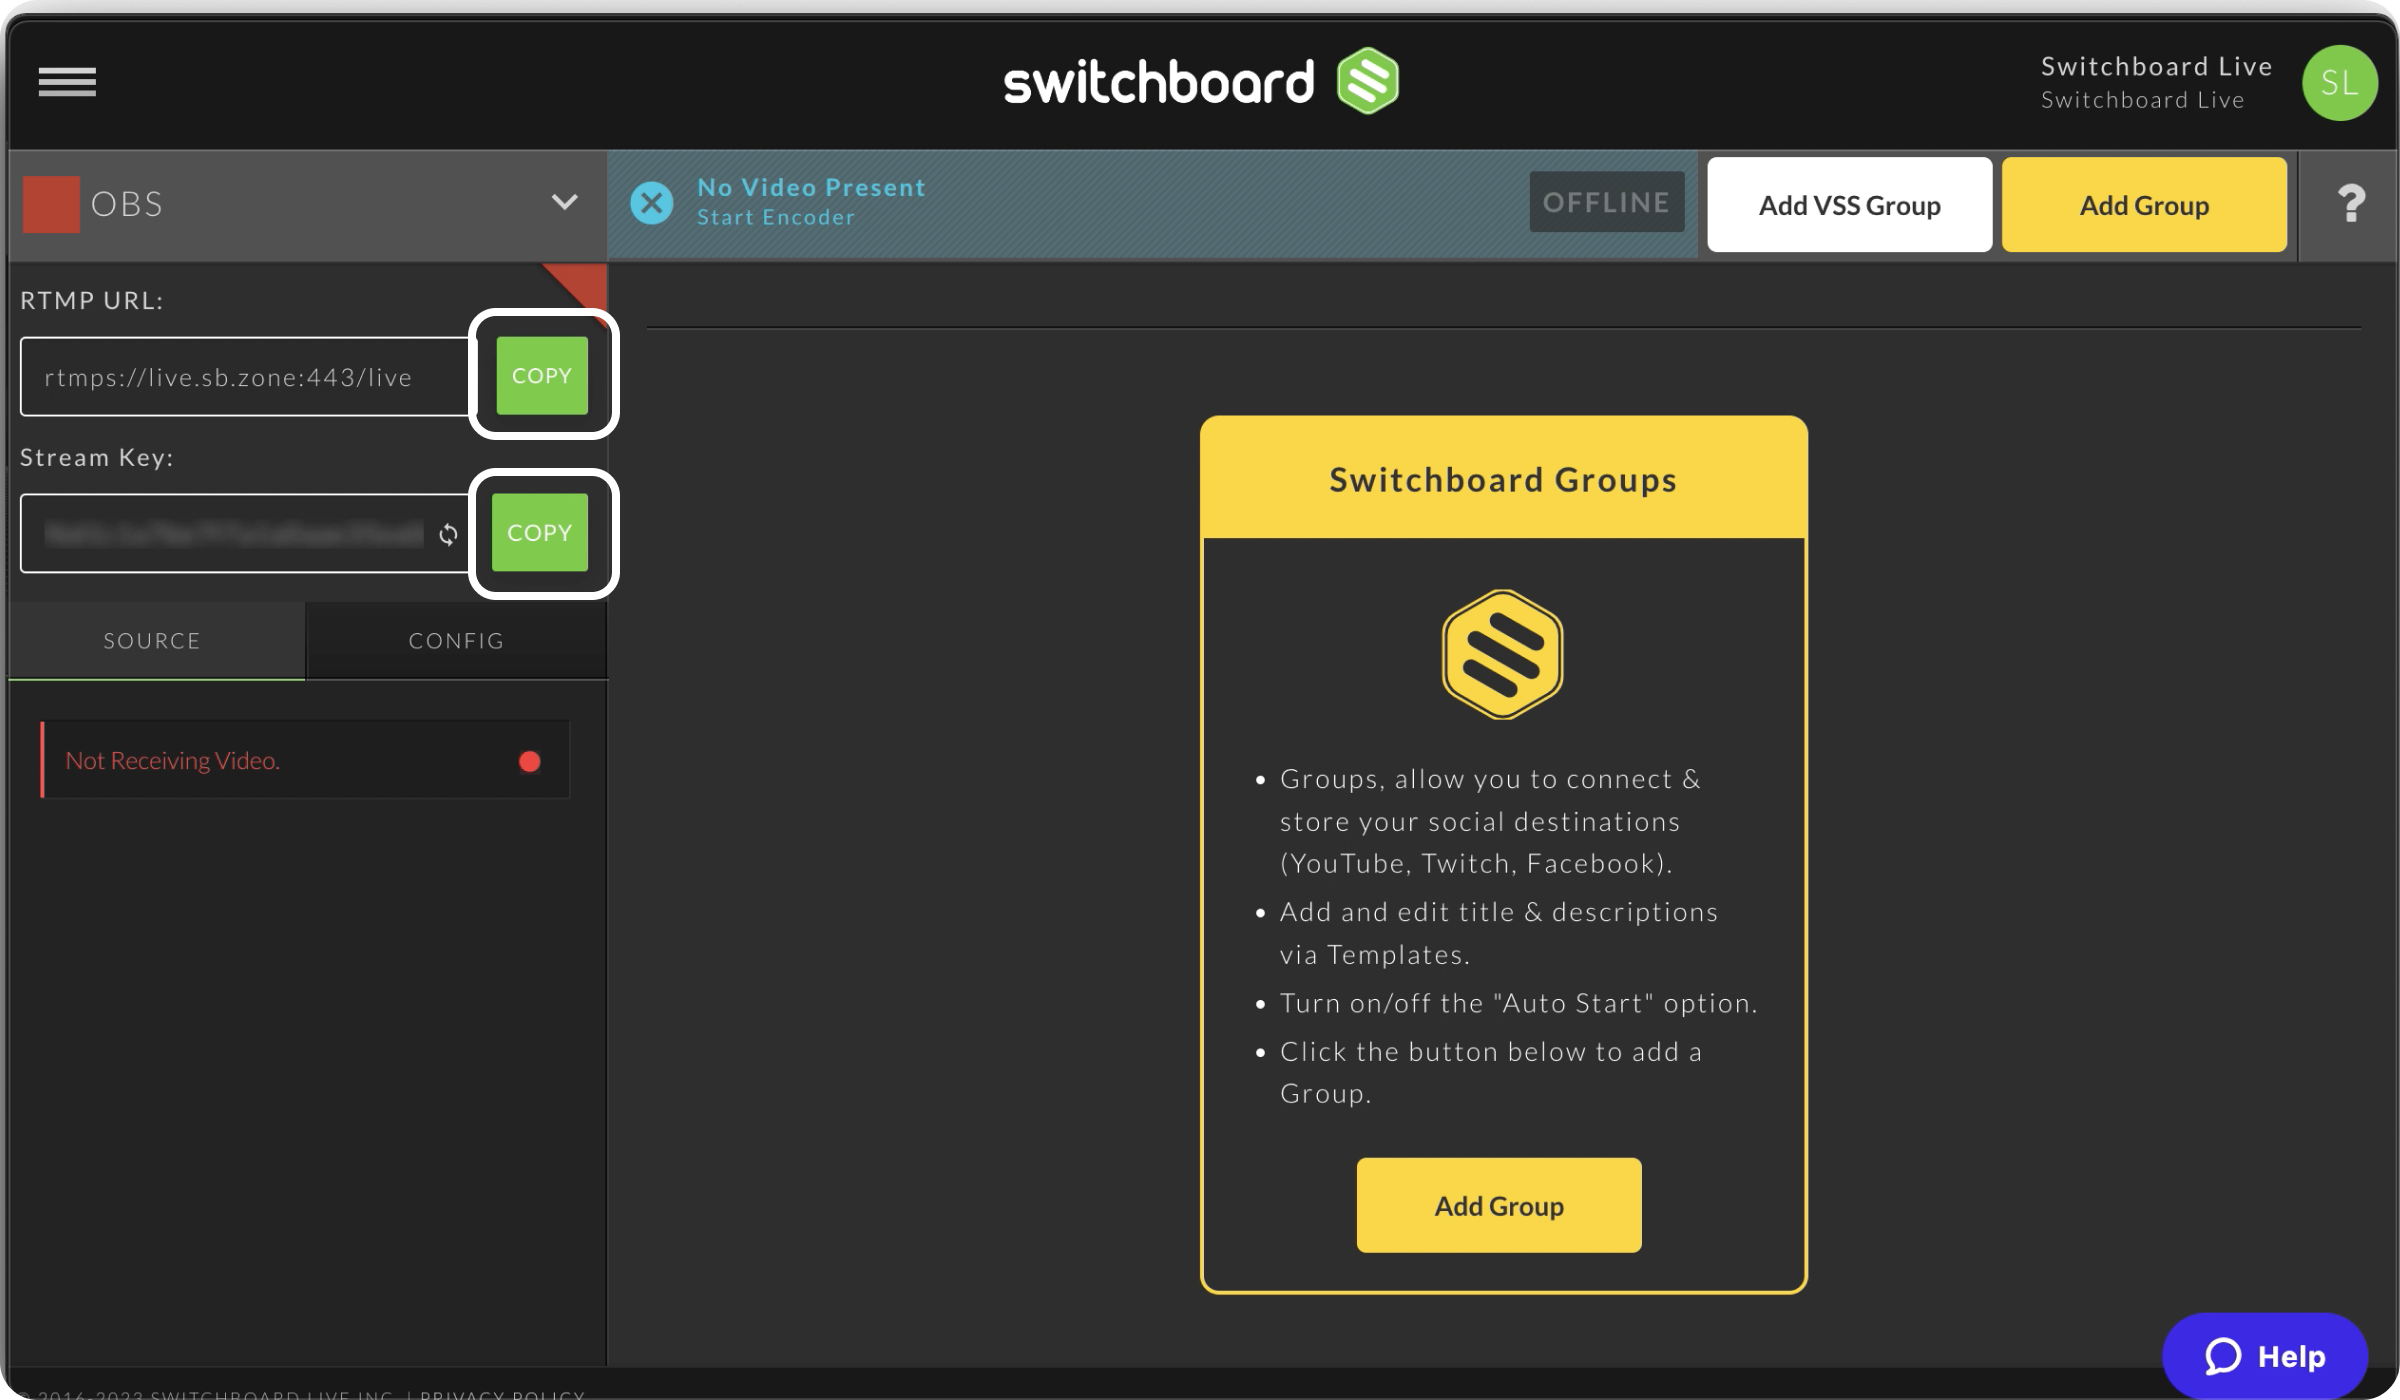 switchboard_live-copy_rtmp_url_and_stream_key.png